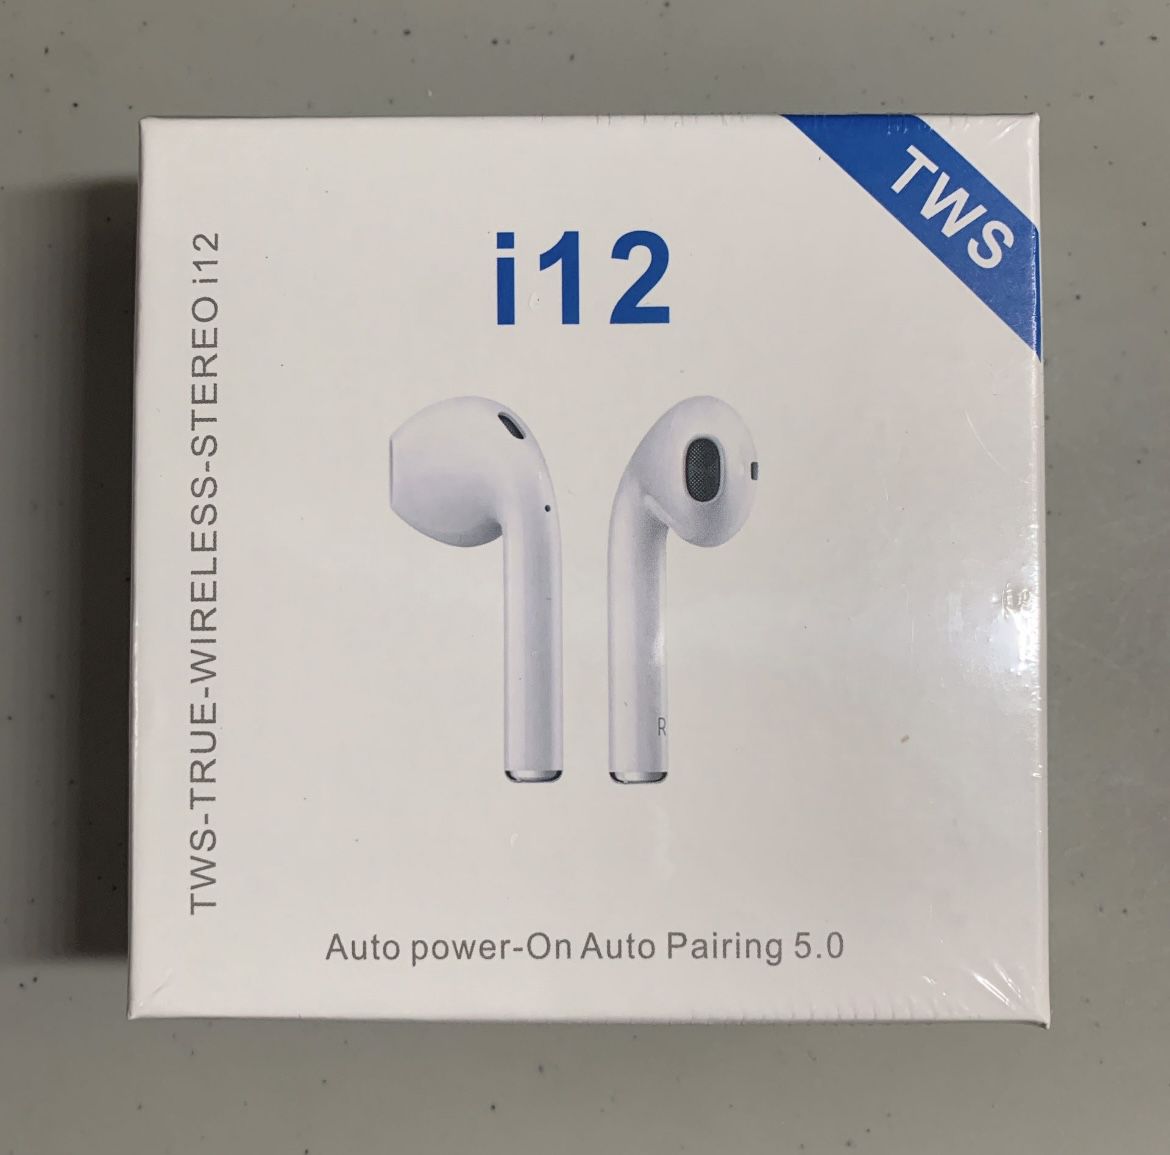 Bluetooth Earpods Headphones Iphone and Android Compatible